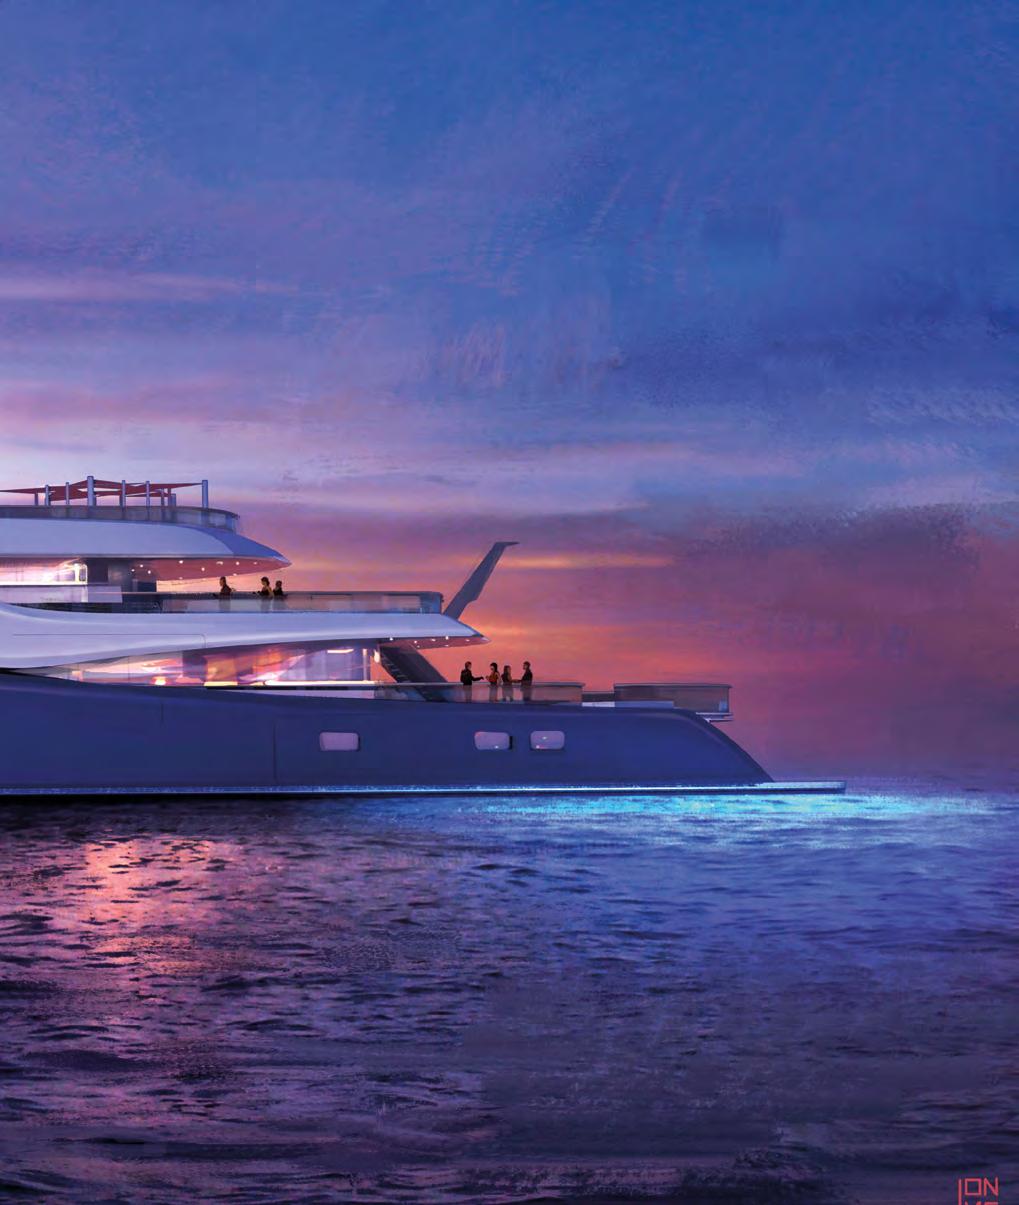 90M YACHT. THE NEW HORIZON Length overall Max beam Full load draught Gross tonnage No. of decks Owner and guests cabins Owner and guests capacity Crew and staff cabins Crew and staff capacity 91.